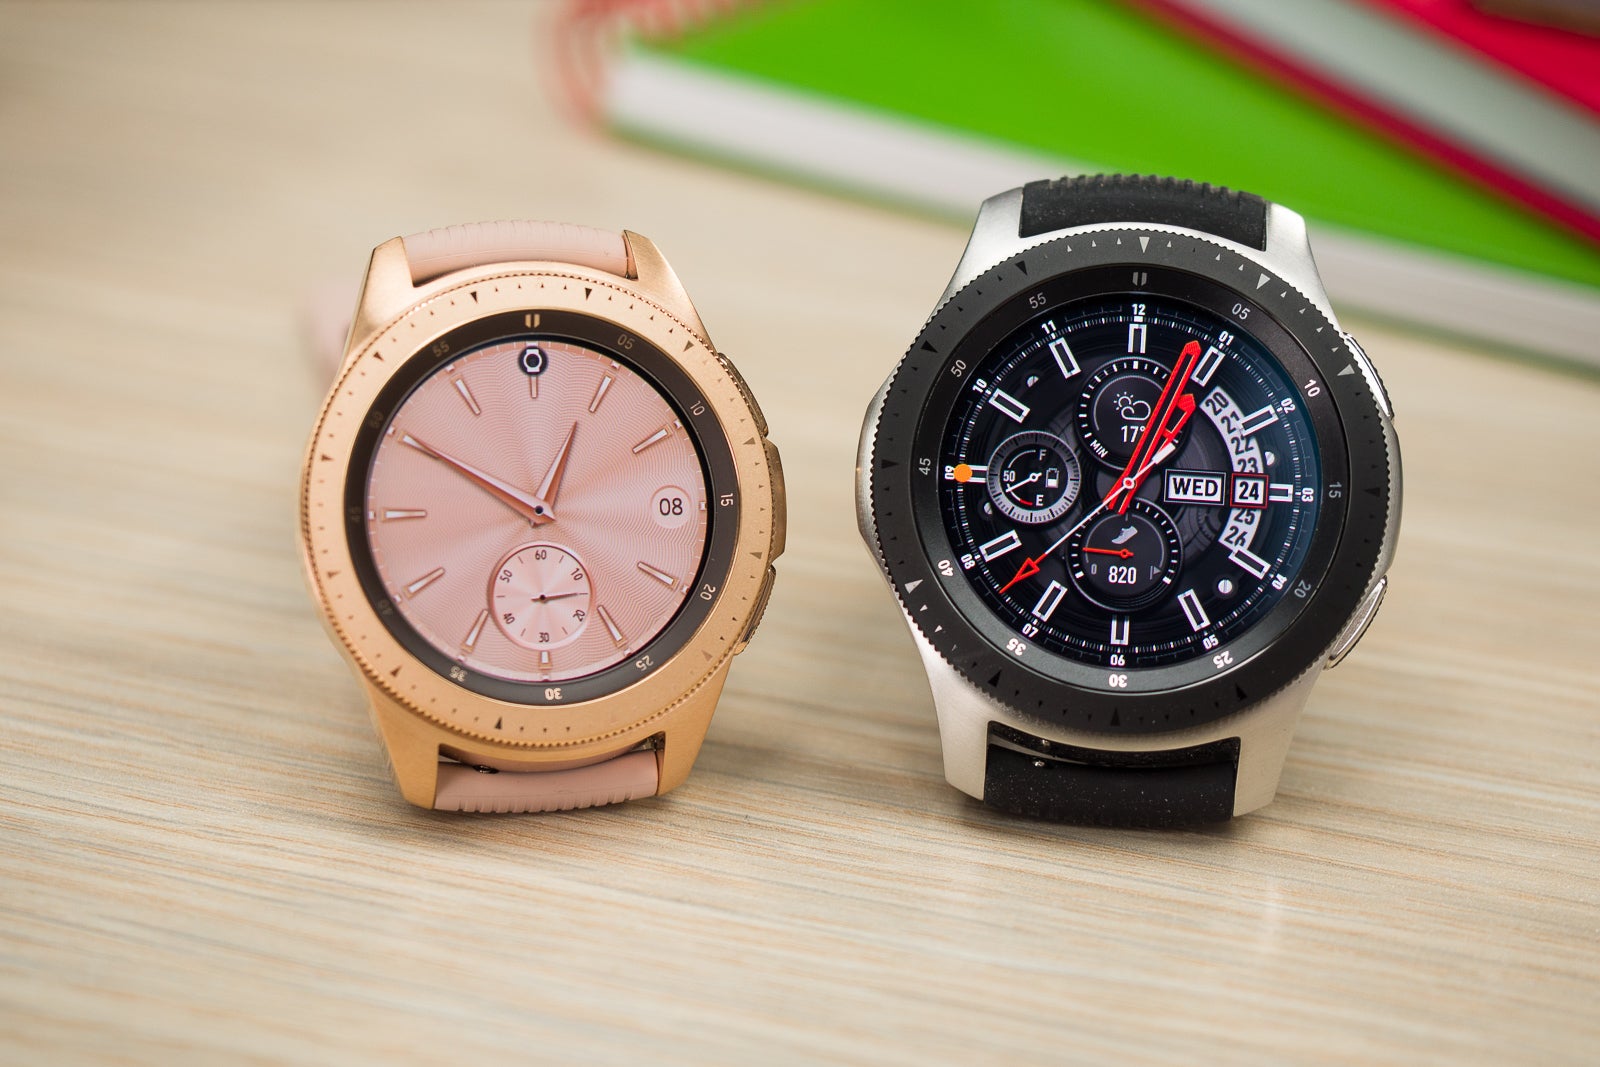 Samsung Galaxy Watch - Apple Watch Series 4 outsold every other smartwatch in 2018